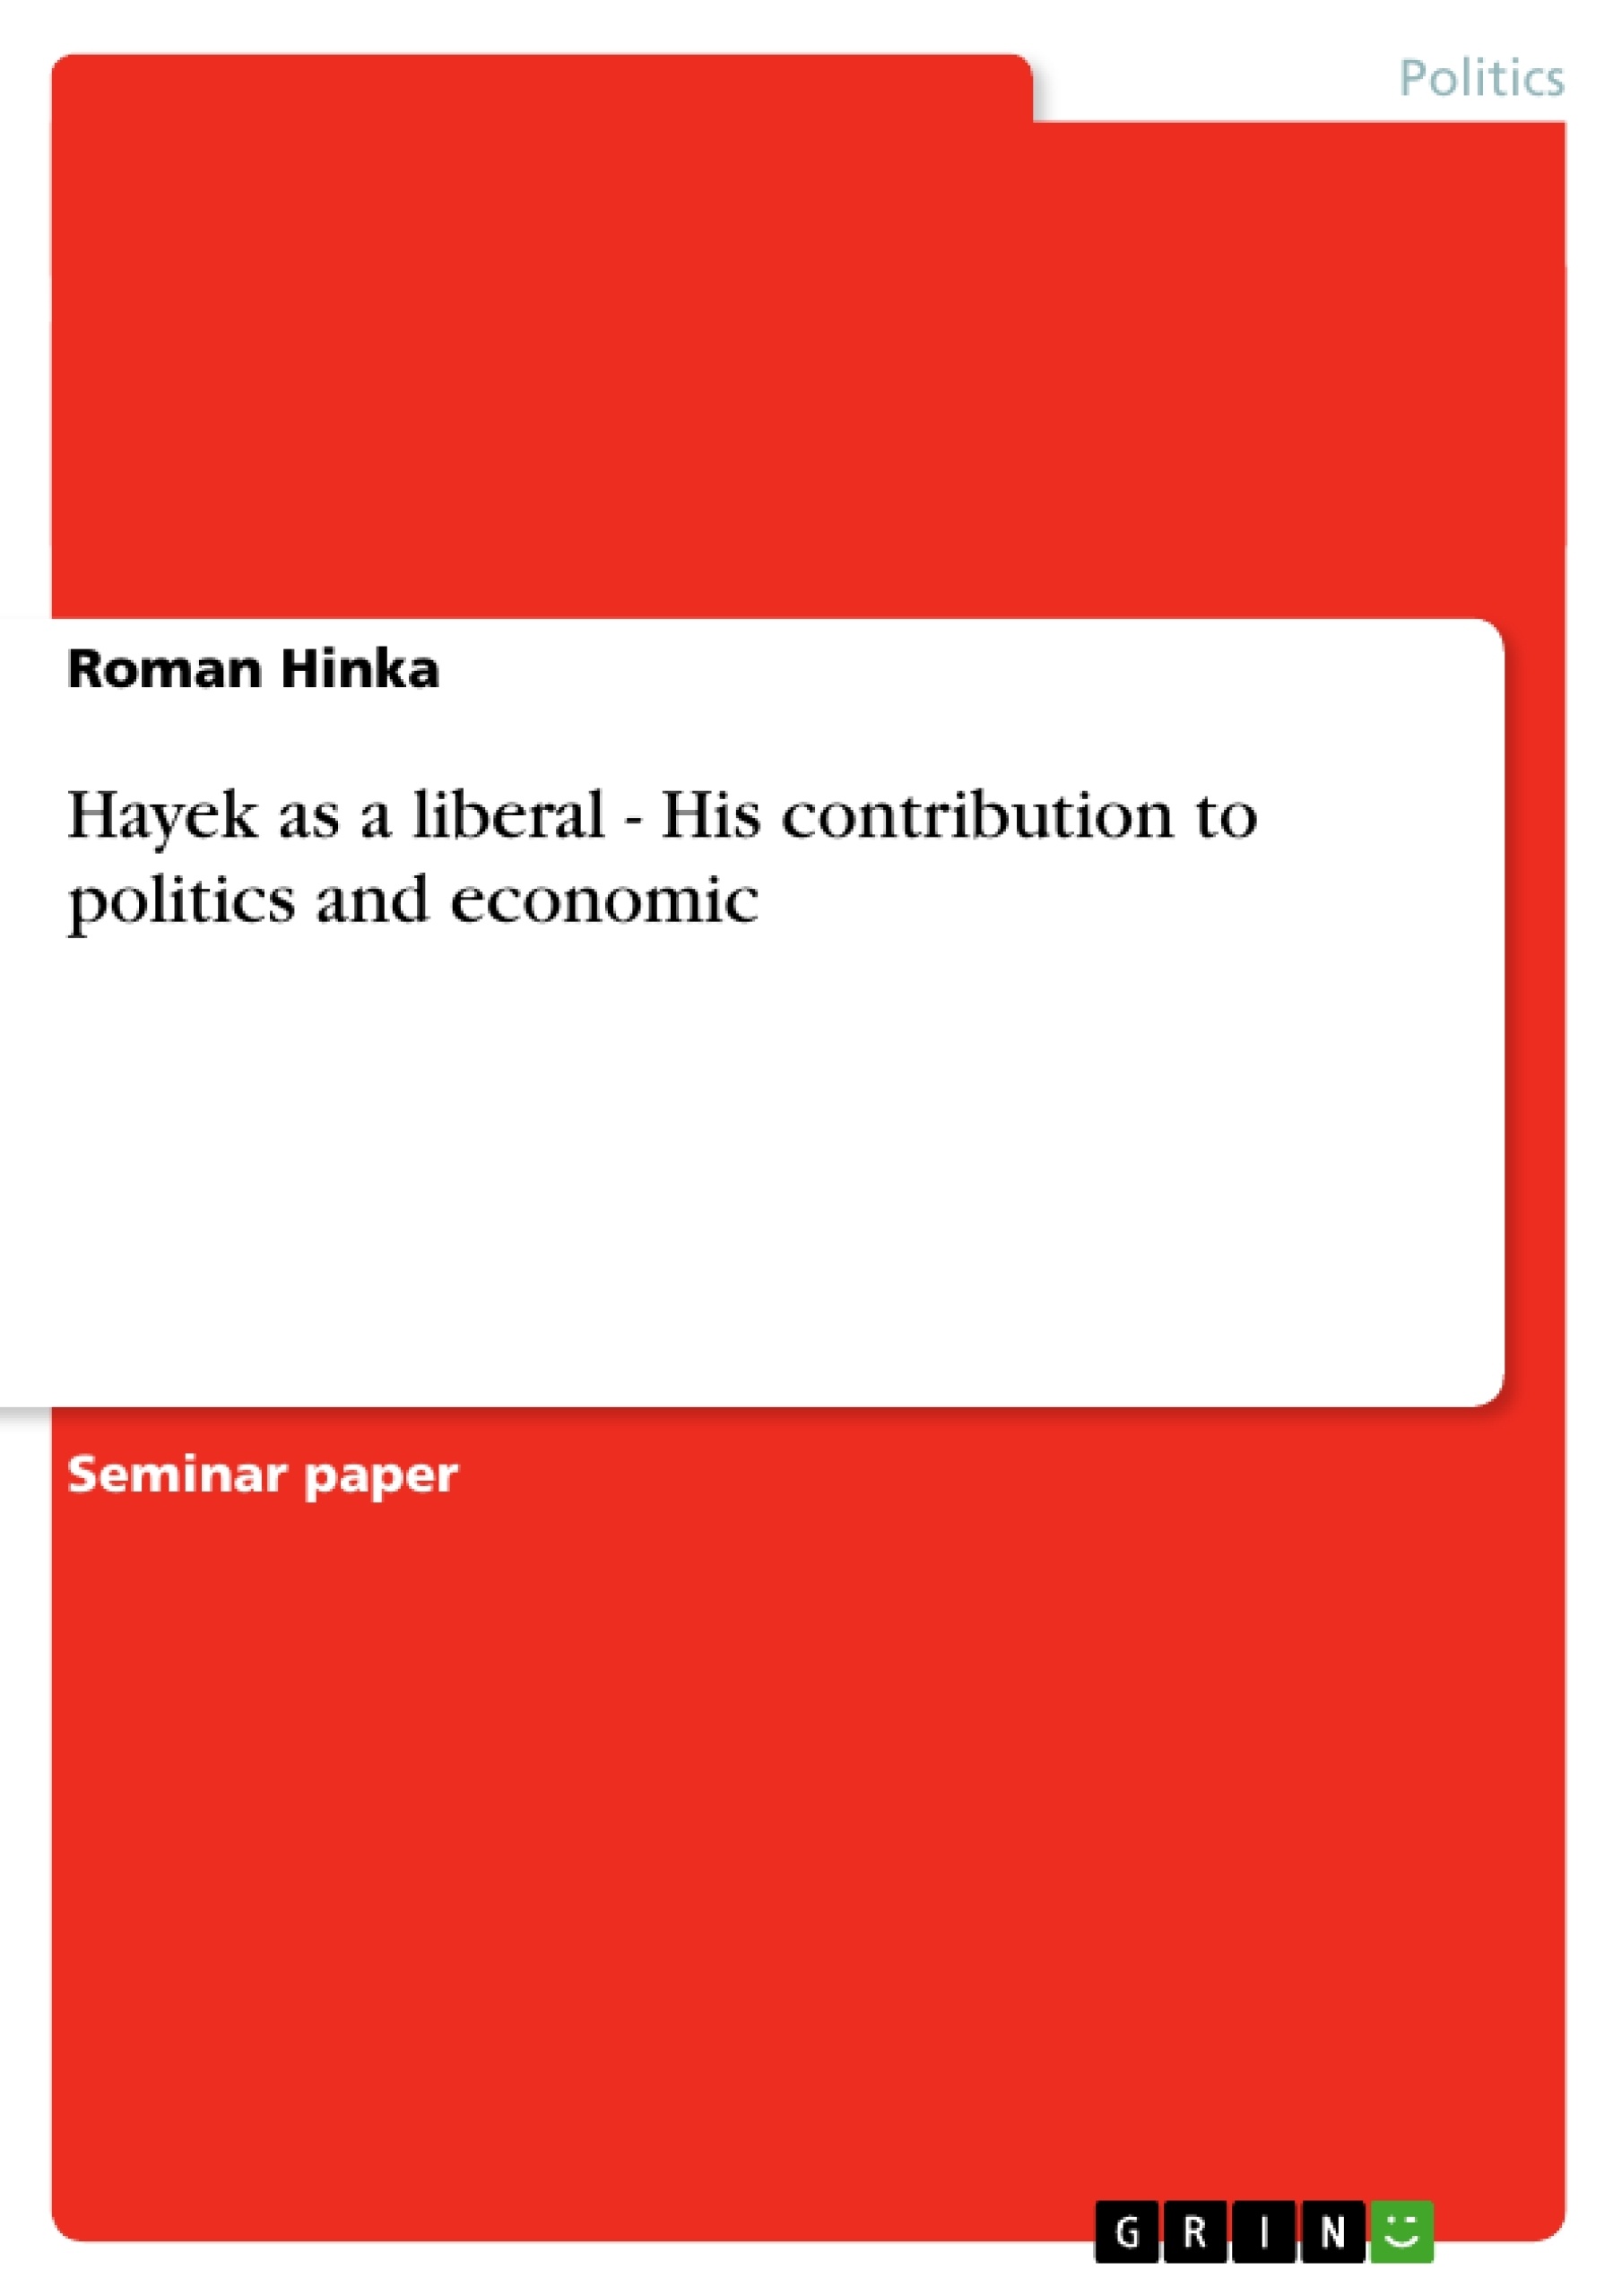 Titre: Hayek as a liberal - His contribution to politics and economic